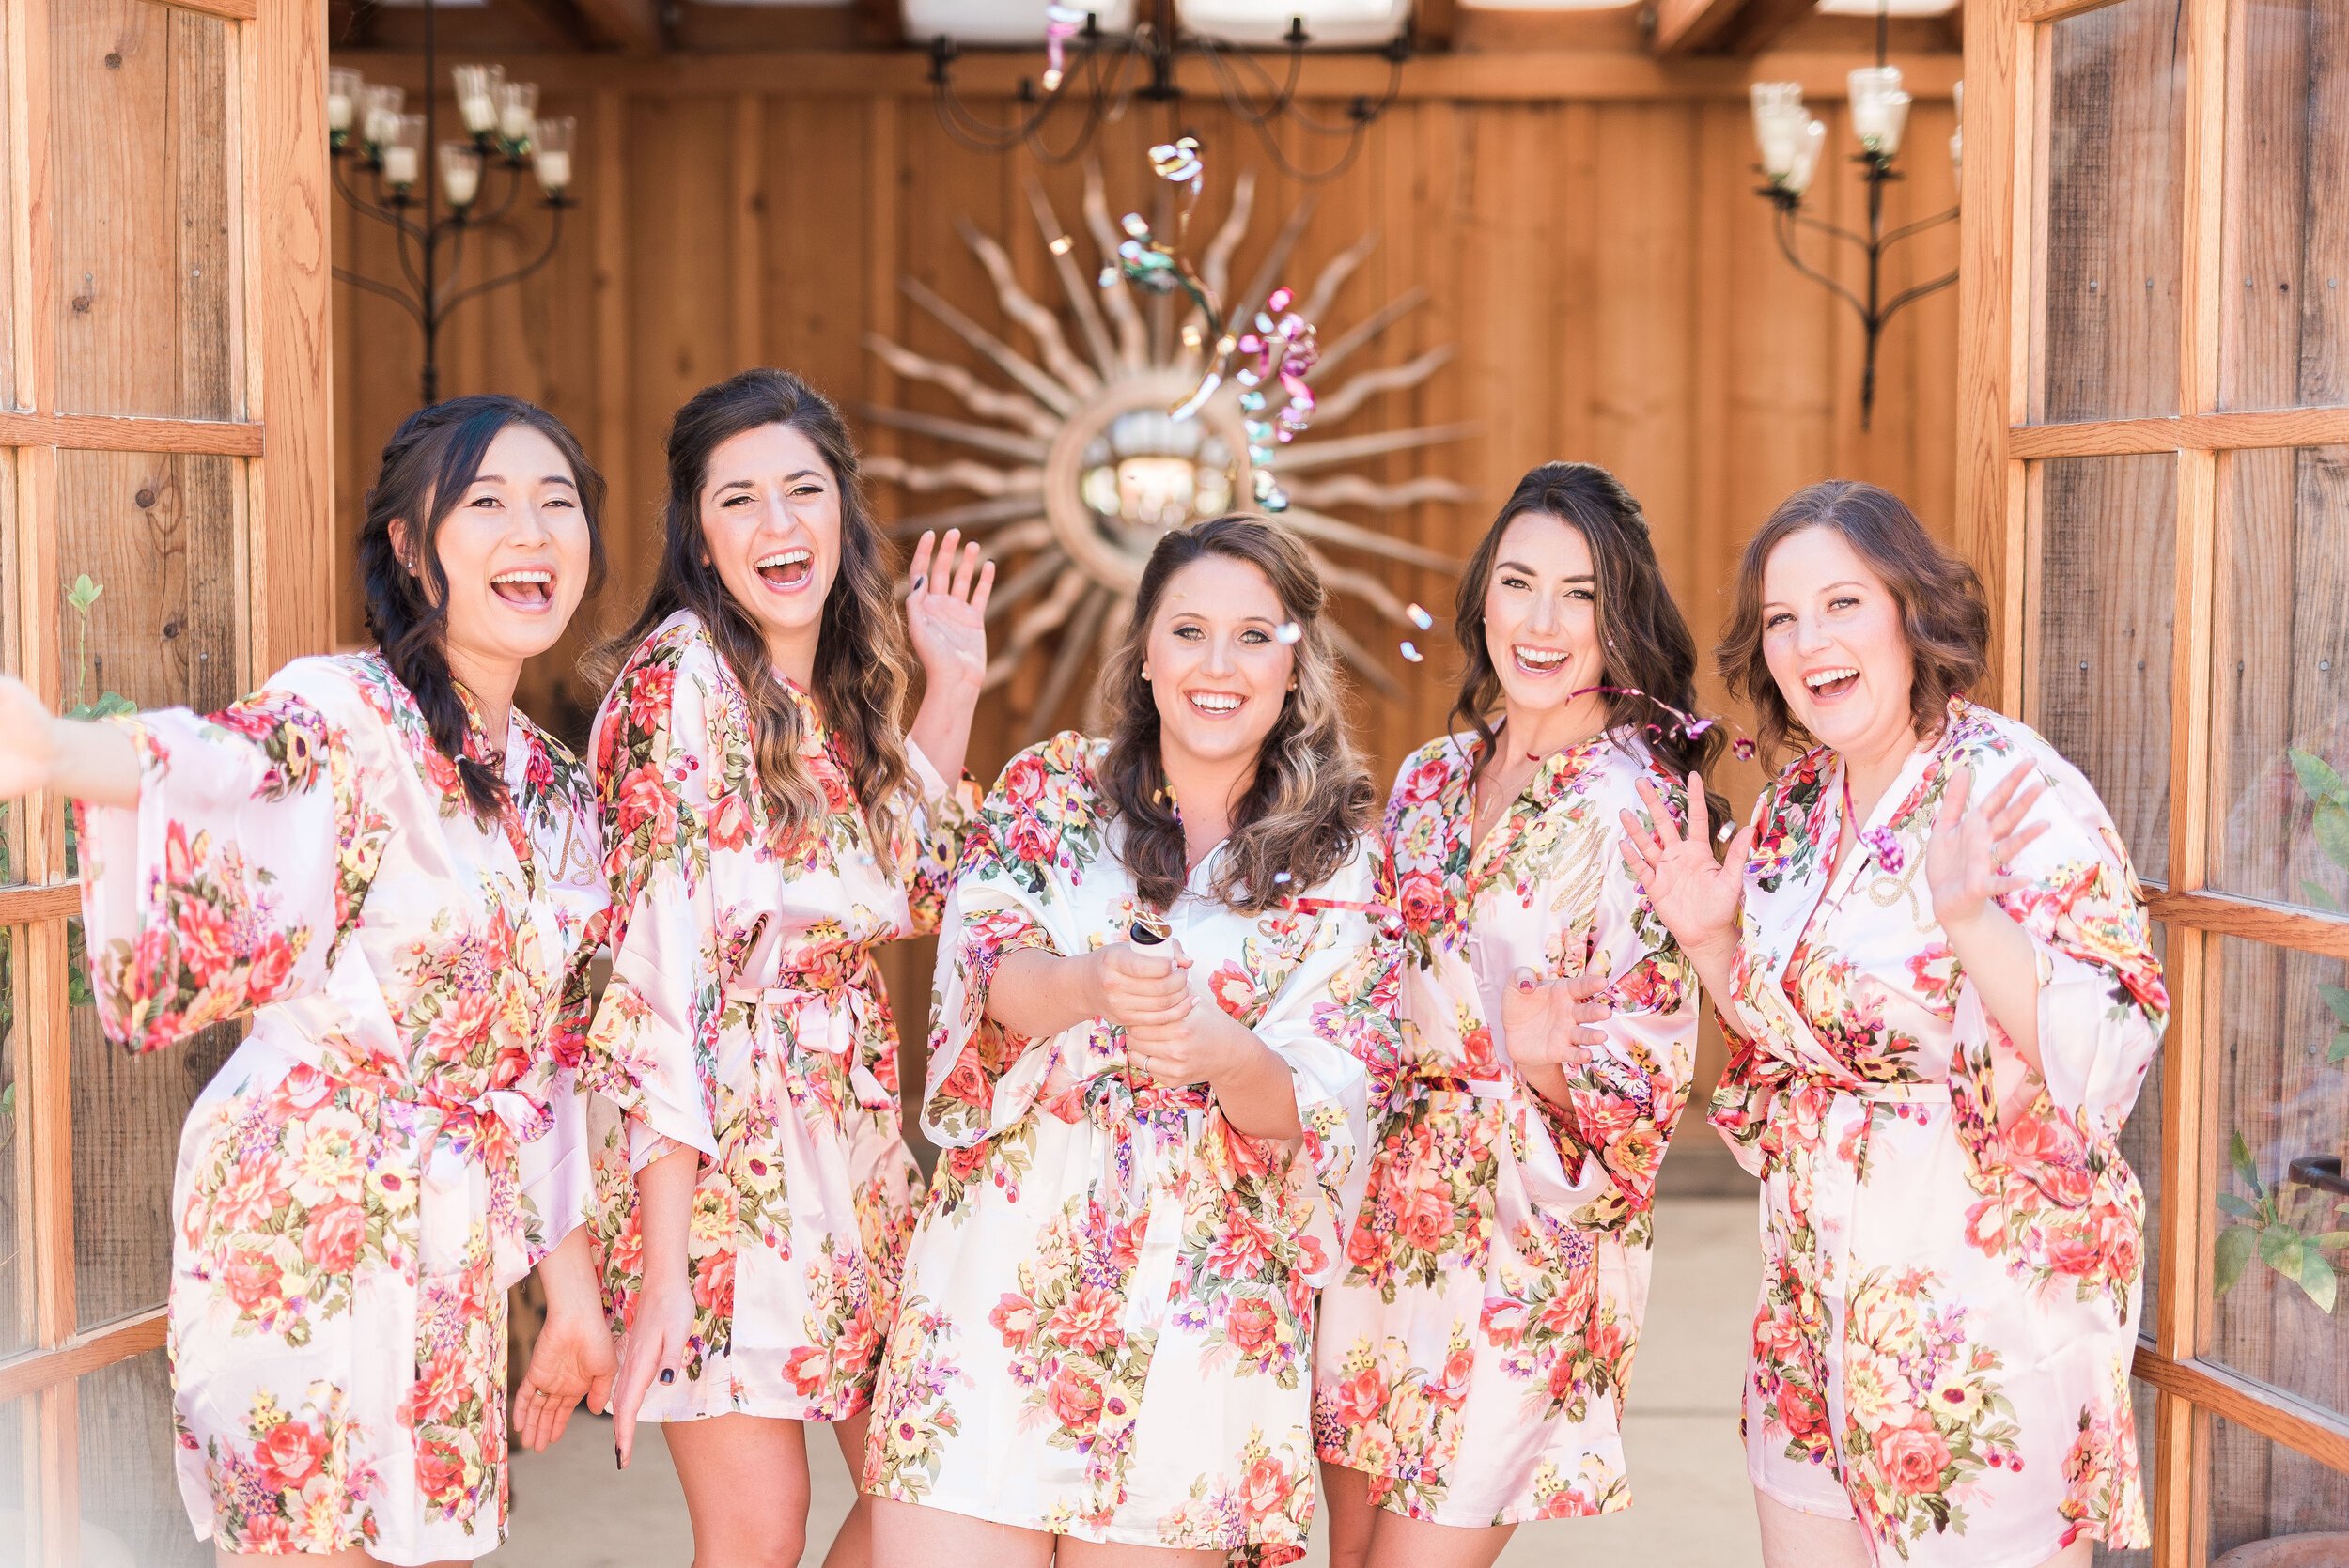 www.santabarbarawedding.com | Roblar Winery and Farm | Brittany Taylor Photography | Bride Getting Ready with Bridesmaids